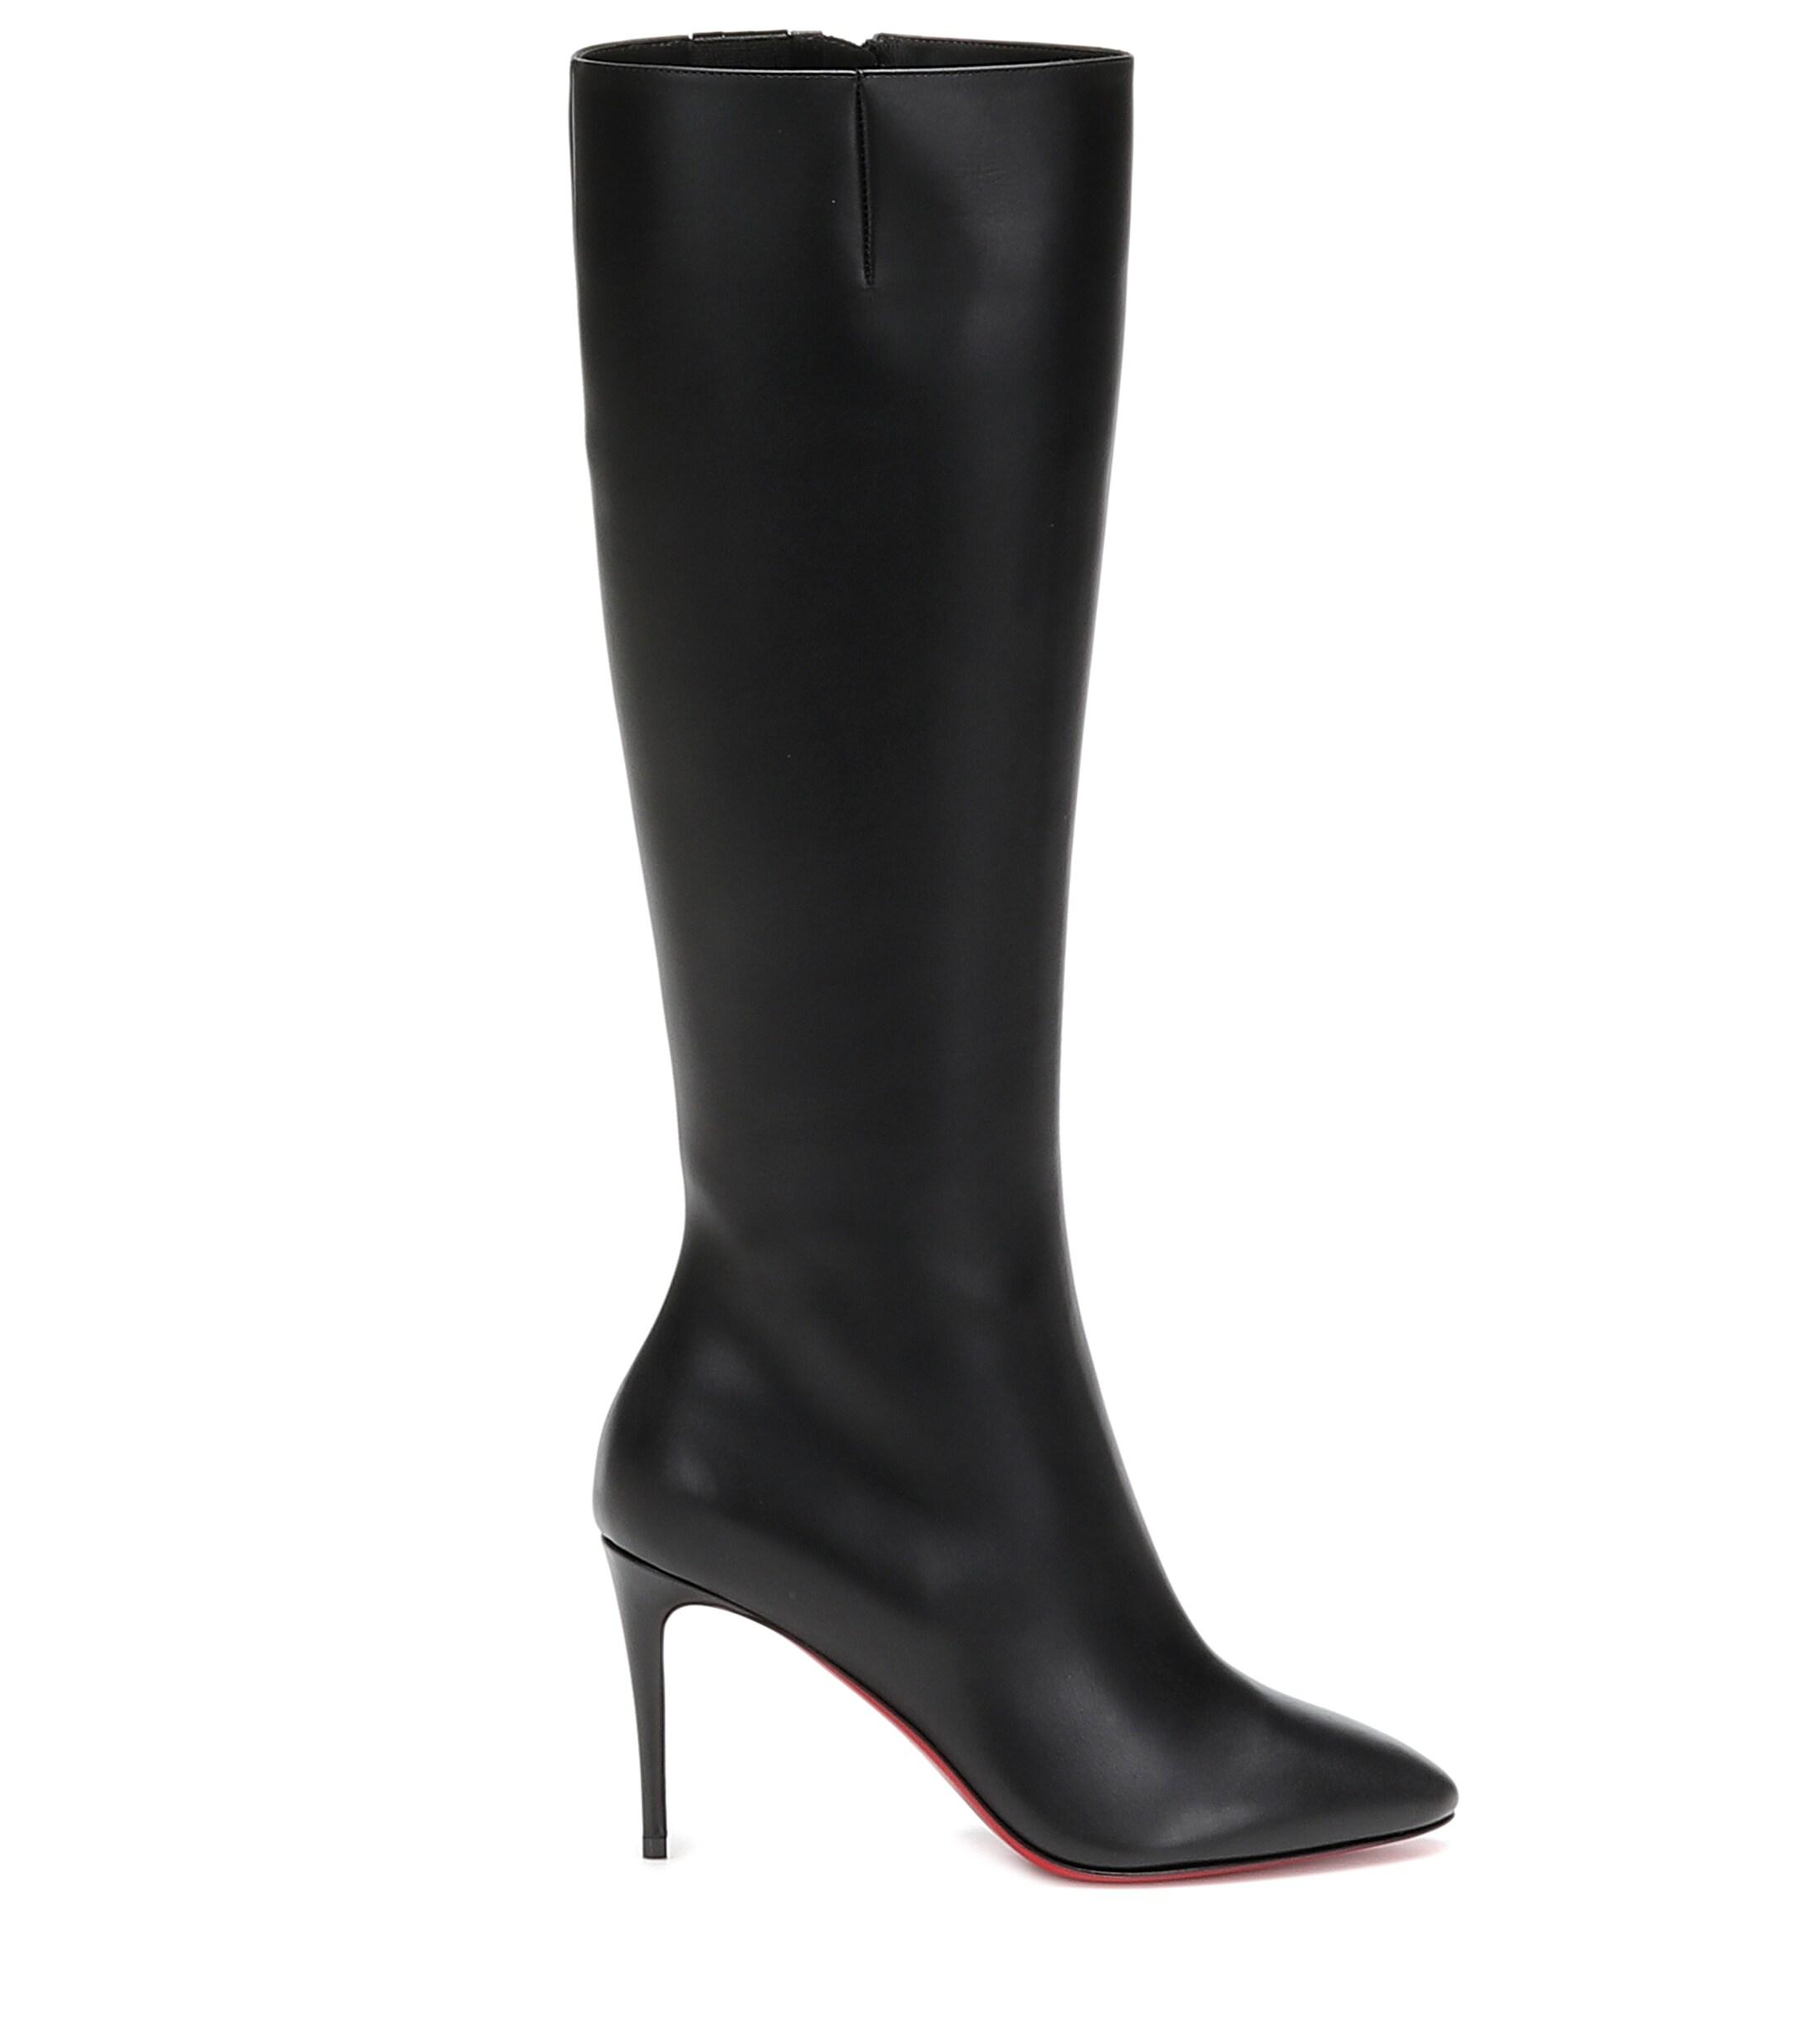 Christian Louboutin Eloise 85 Knee-high Leather Boots in Black - Lyst